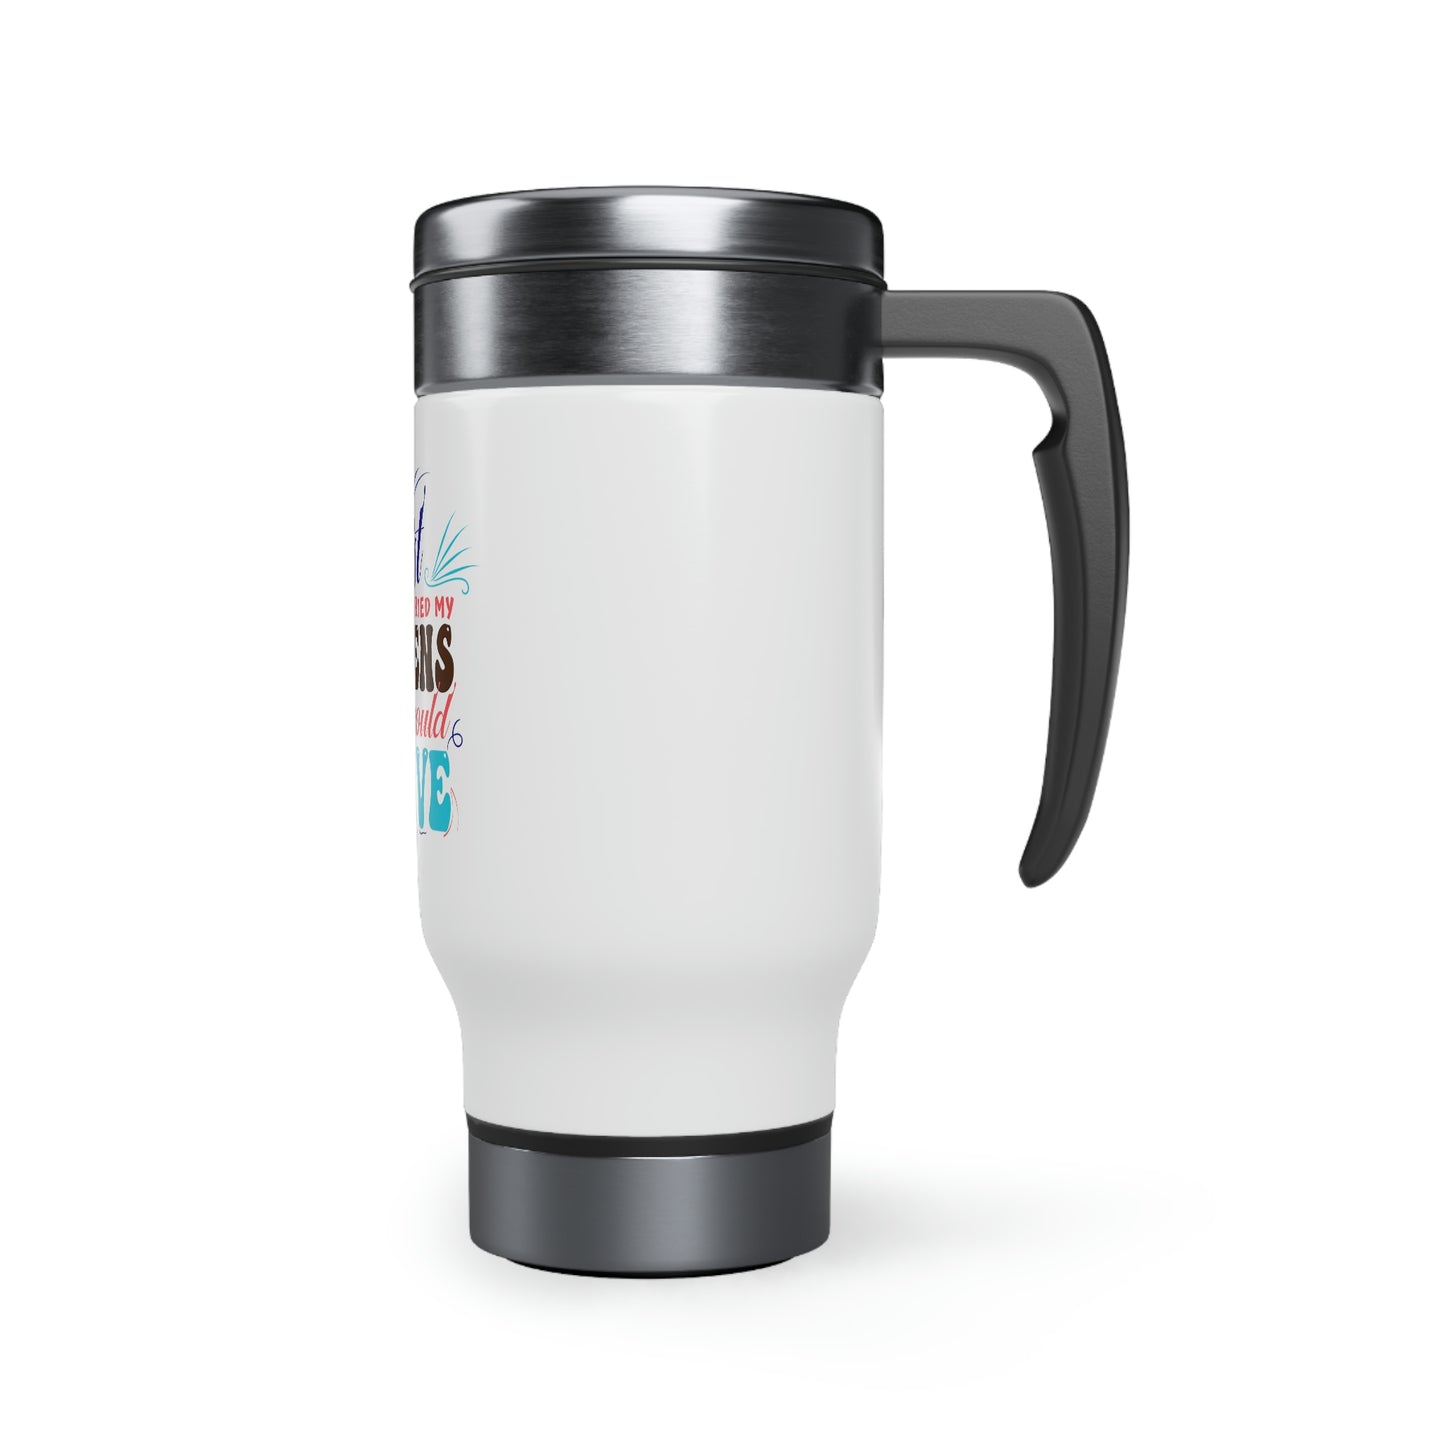 Christ Carried My Burdens So I Could Thrive Travel Mug with Handle, 14oz